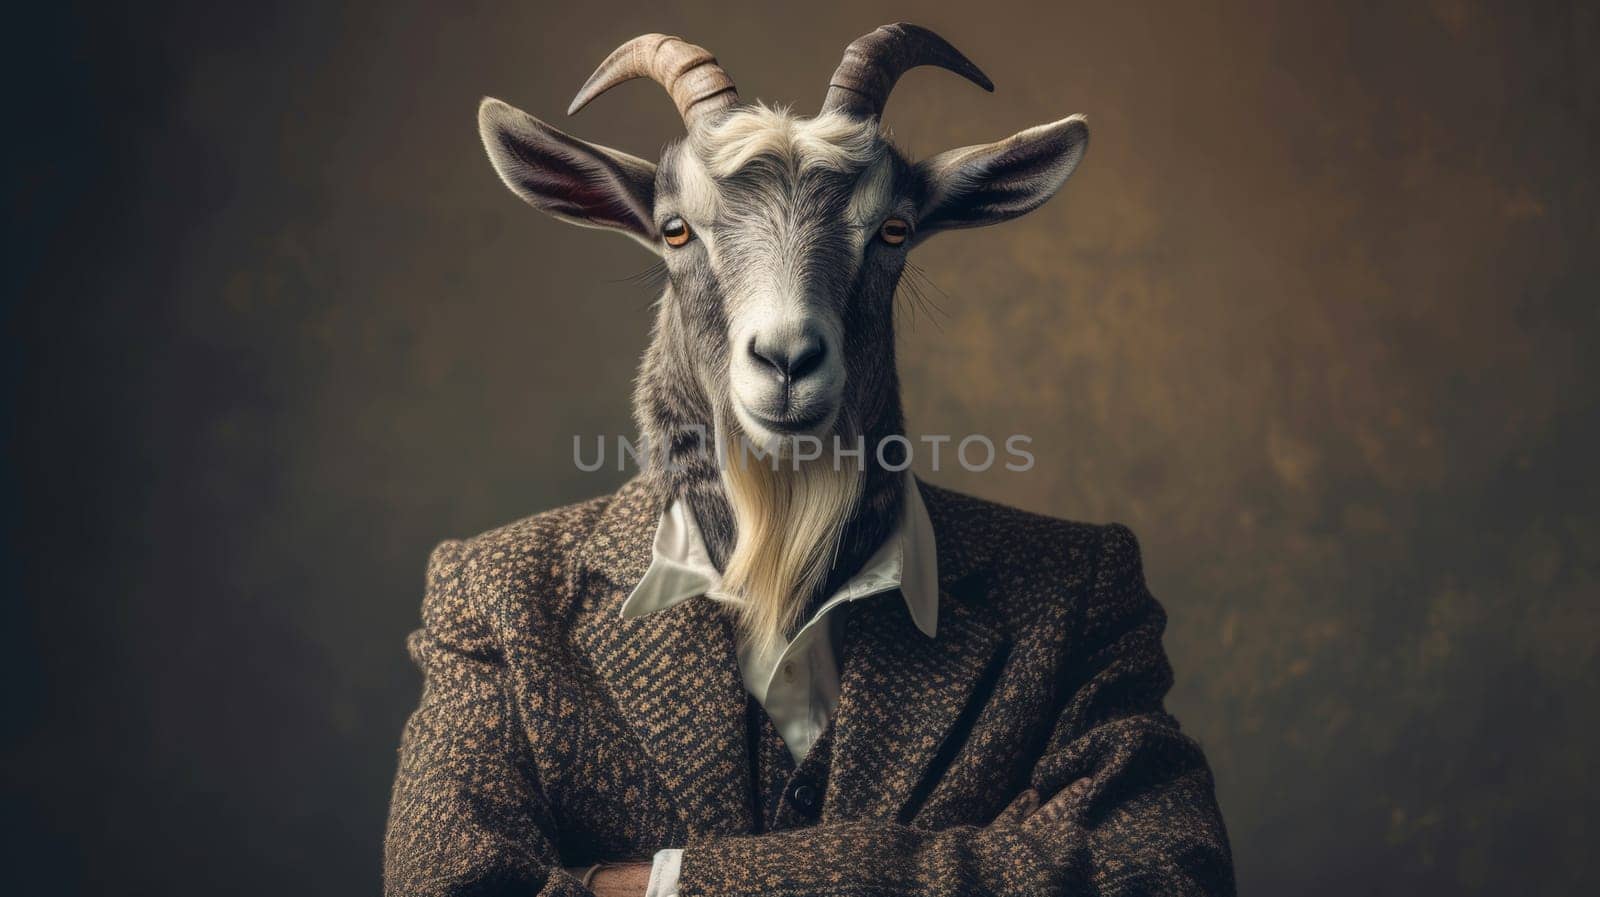 A goat wearing a suit and tie with his arms crossed